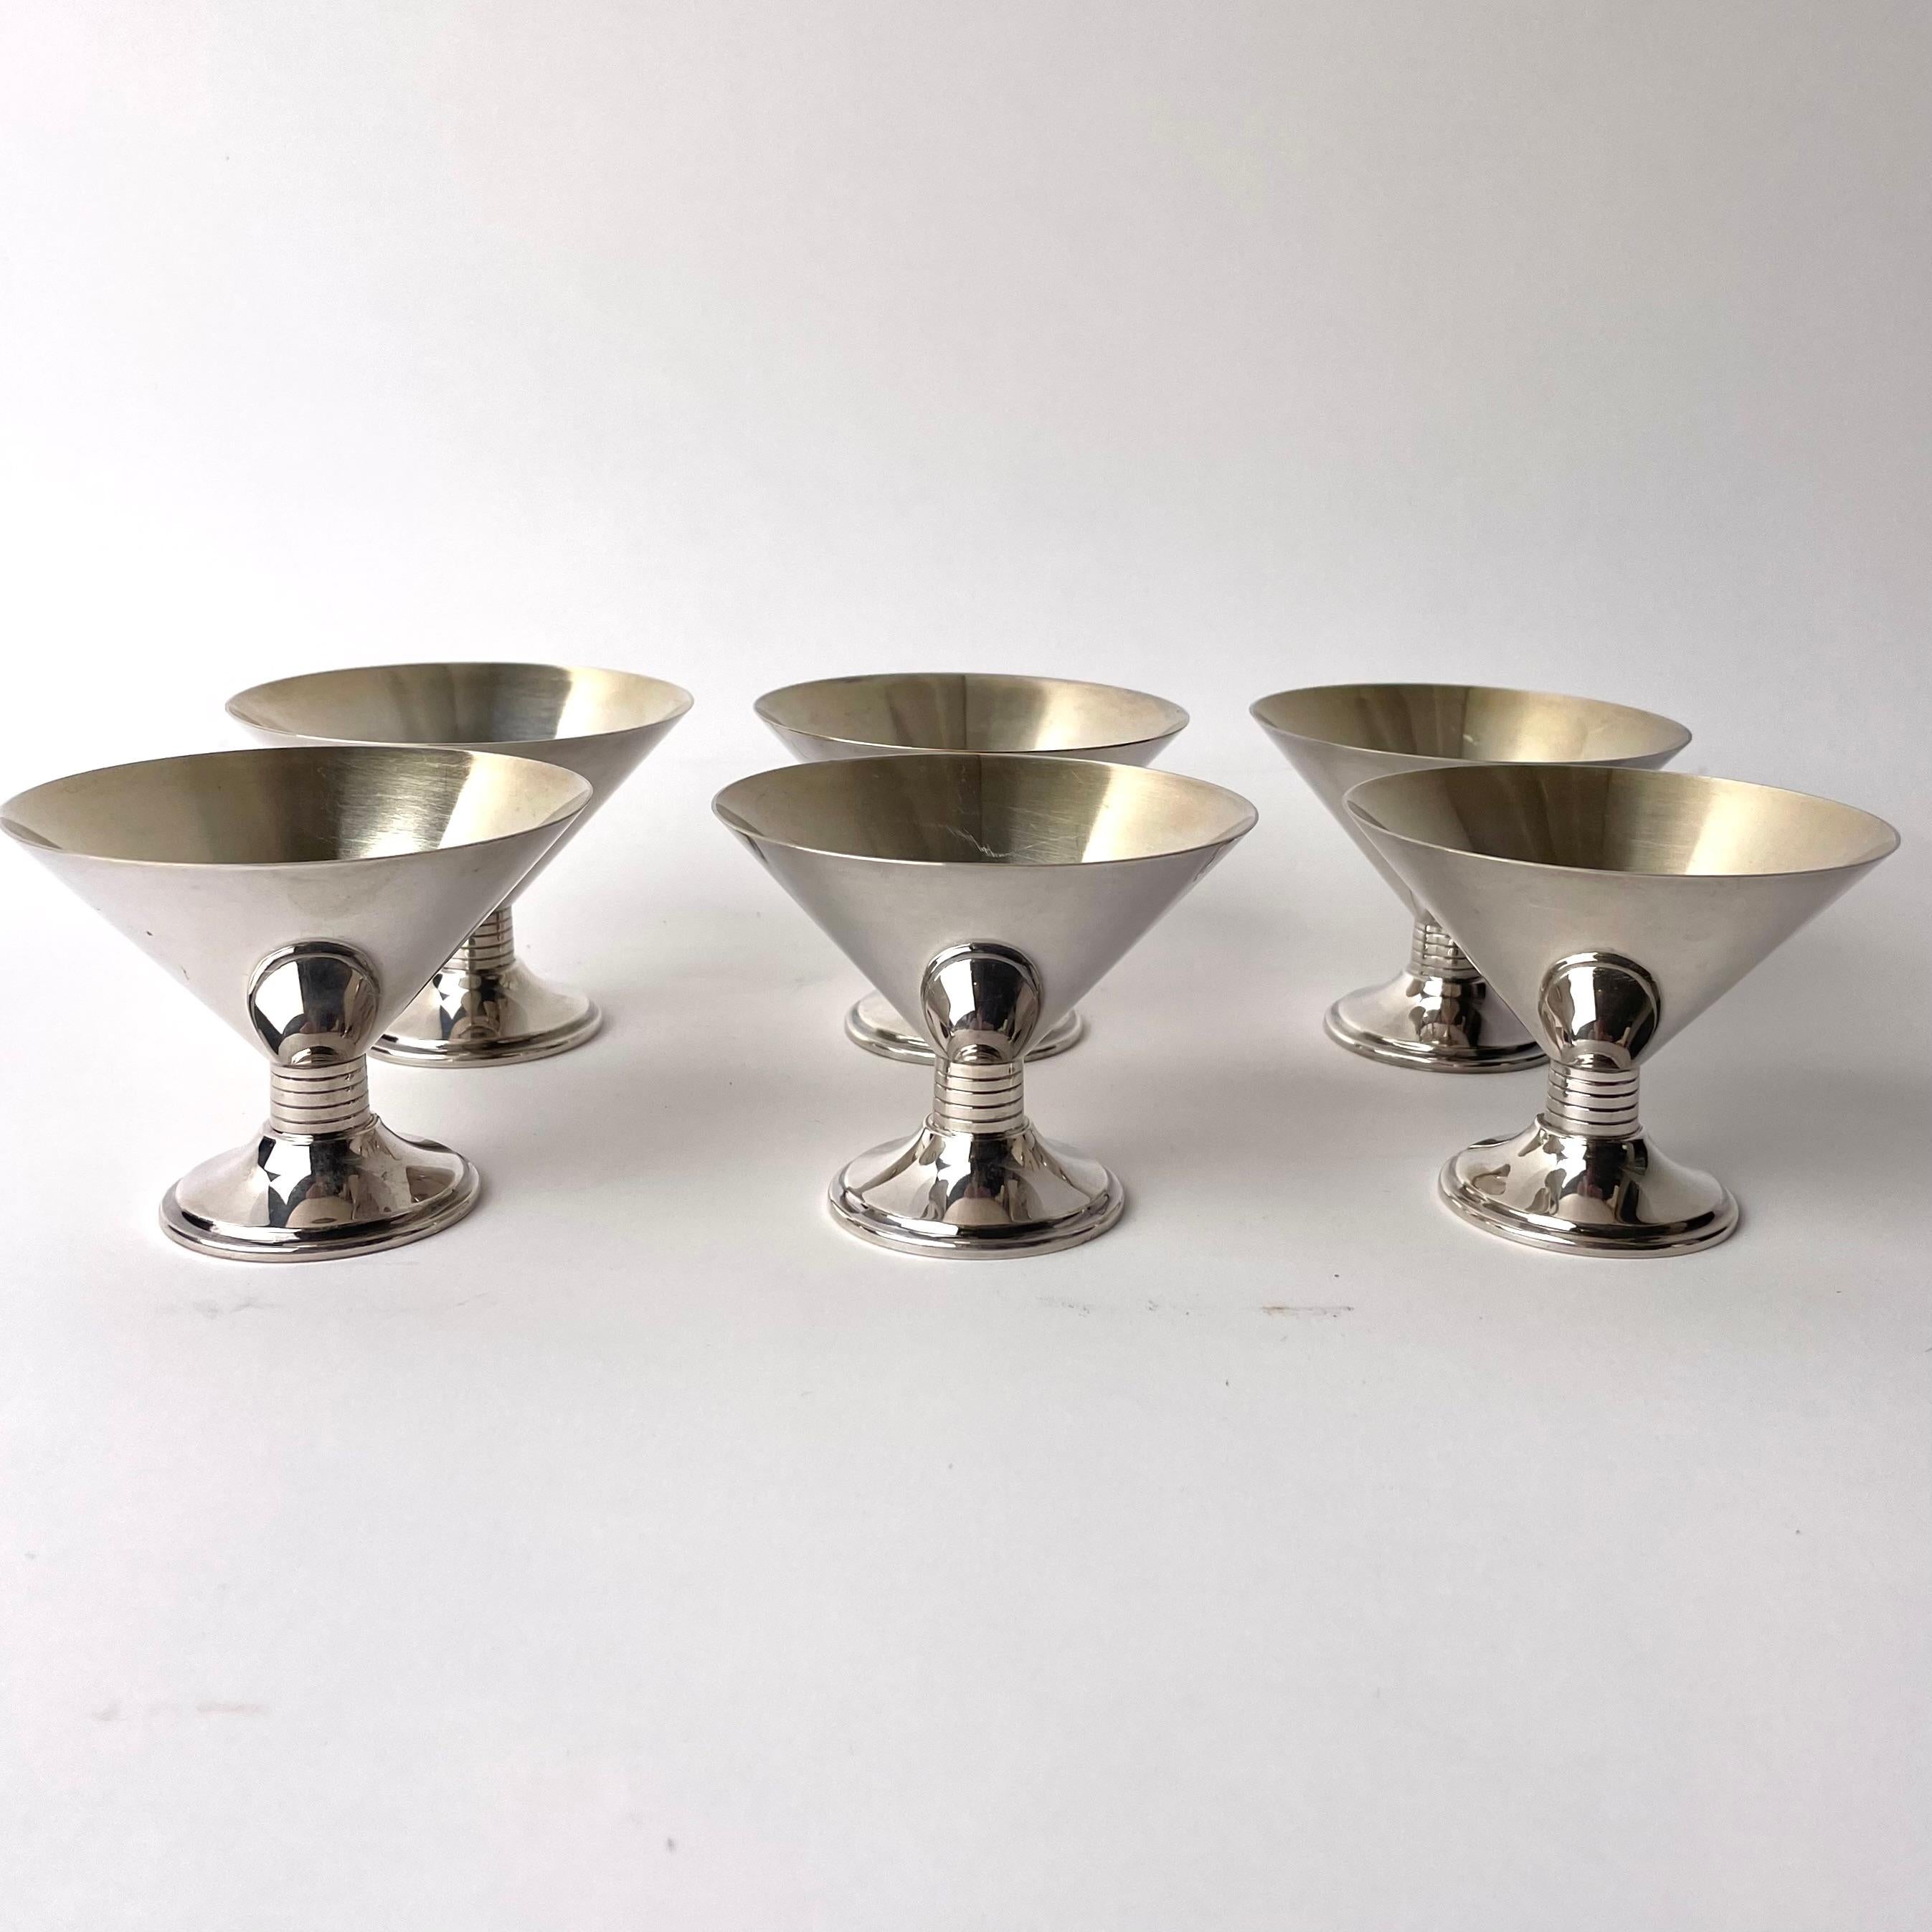 A set of six Art Deco cocktail glasses, produced during the 1920s or possibly the 1930s. The glasses are emblematic of Art Deco sensibility, combing a reverence for form and elegance, and rendering these ideas in modern material, here in silver